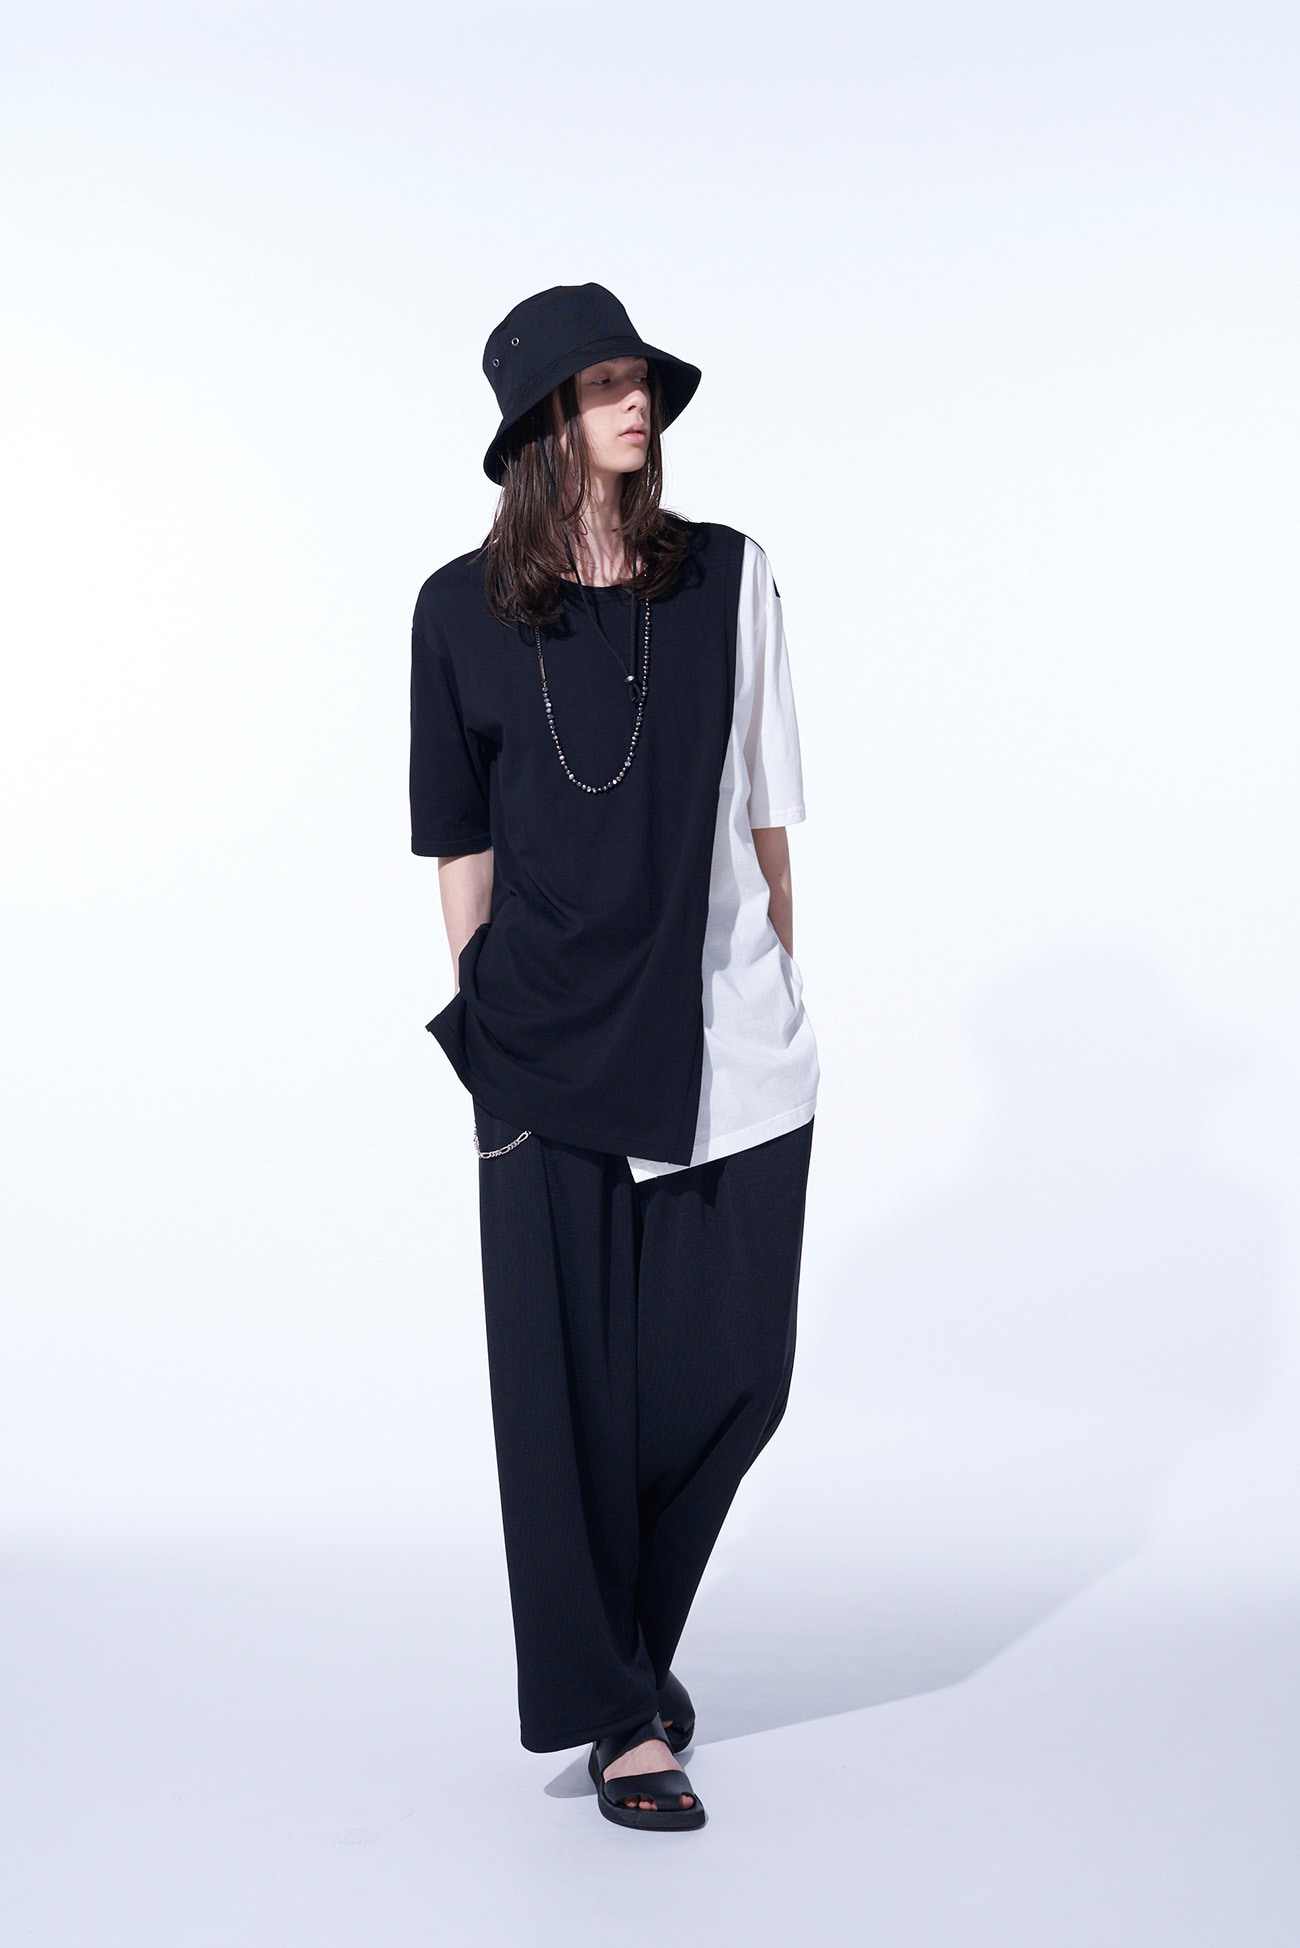 POLYESTER SMOOTH JERSEY DRAWSTRING WIDE PANTS